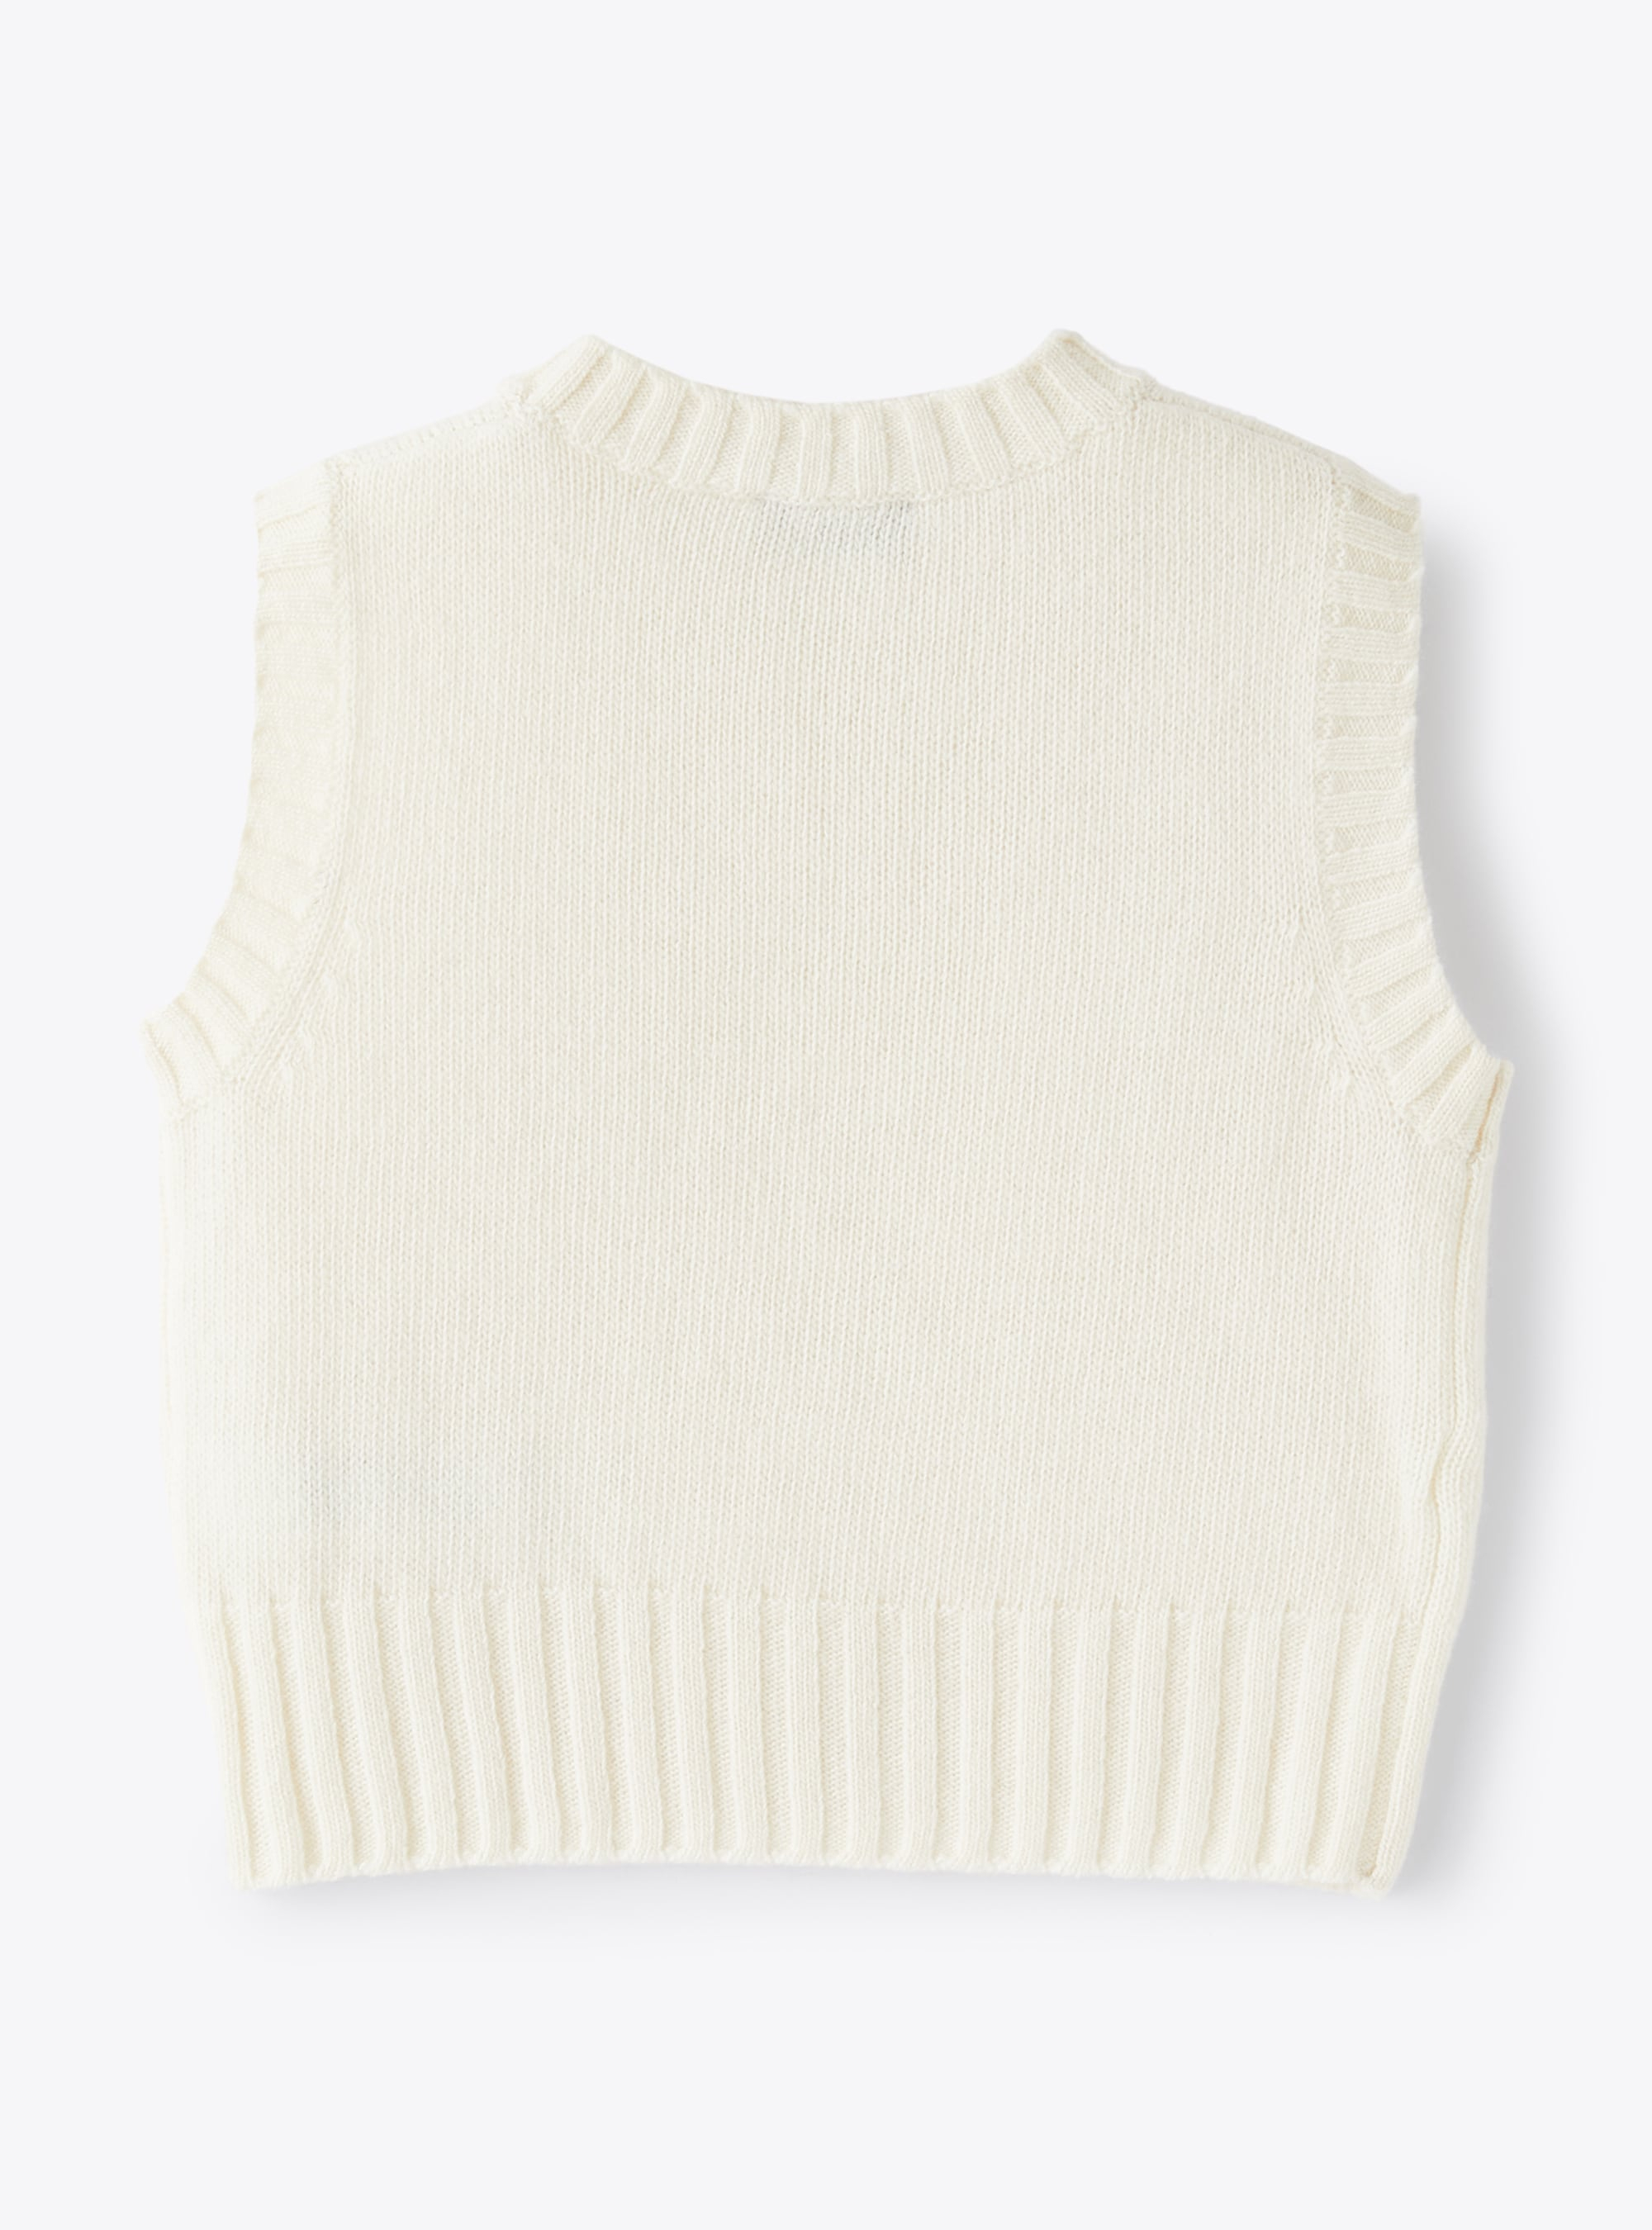 White cable knit wool tank top - White | Il Gufo